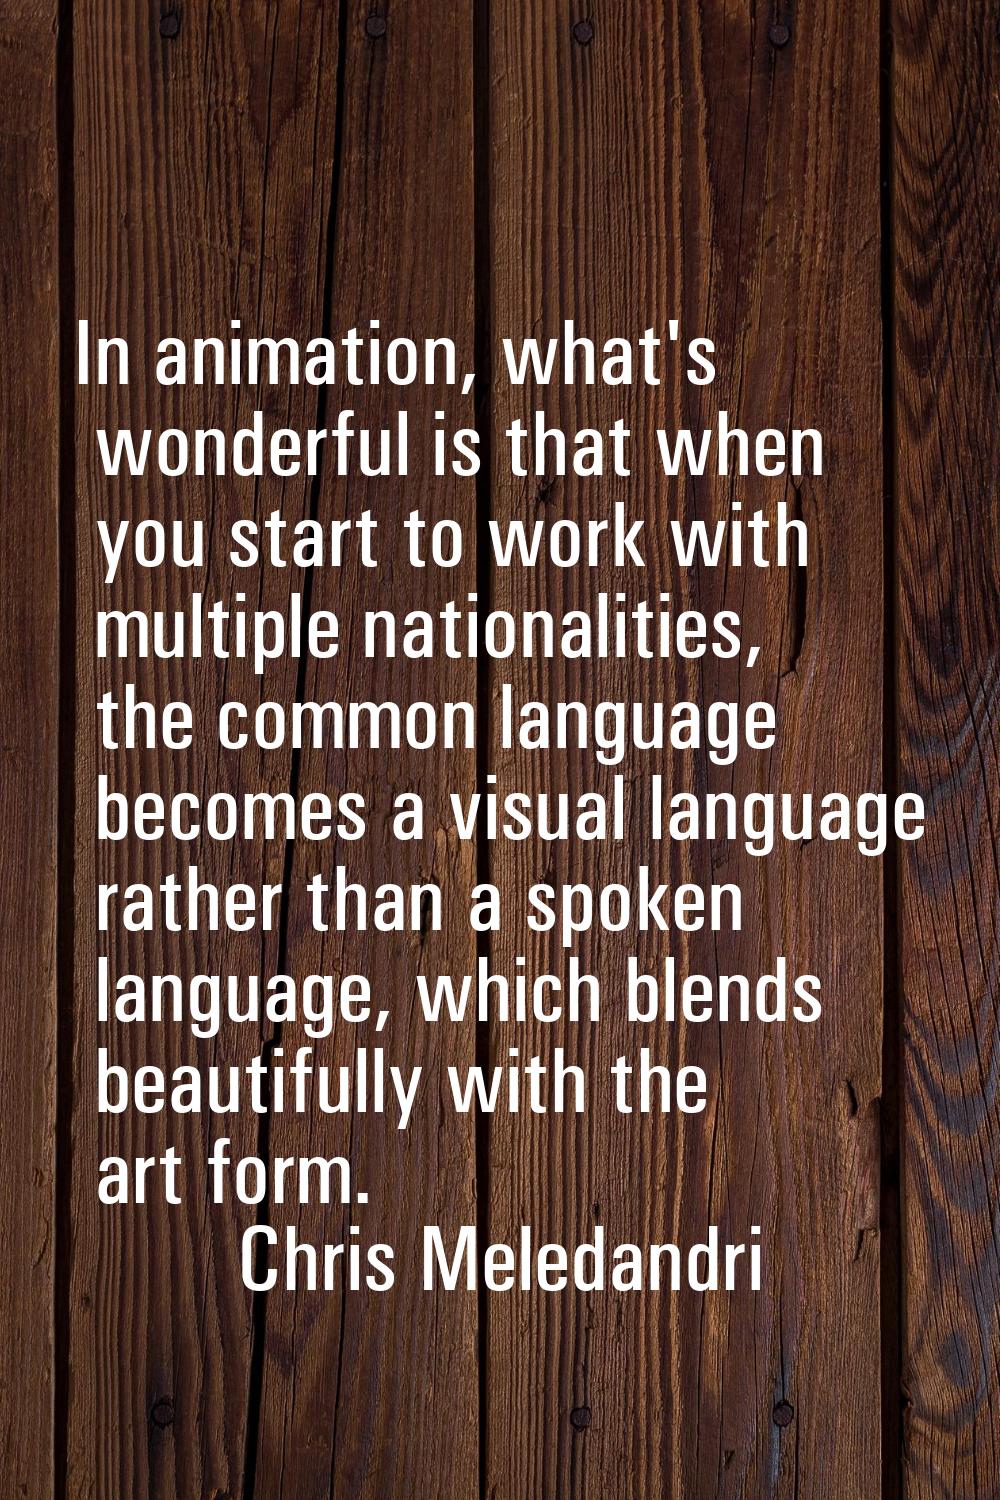 In animation, what's wonderful is that when you start to work with multiple nationalities, the comm